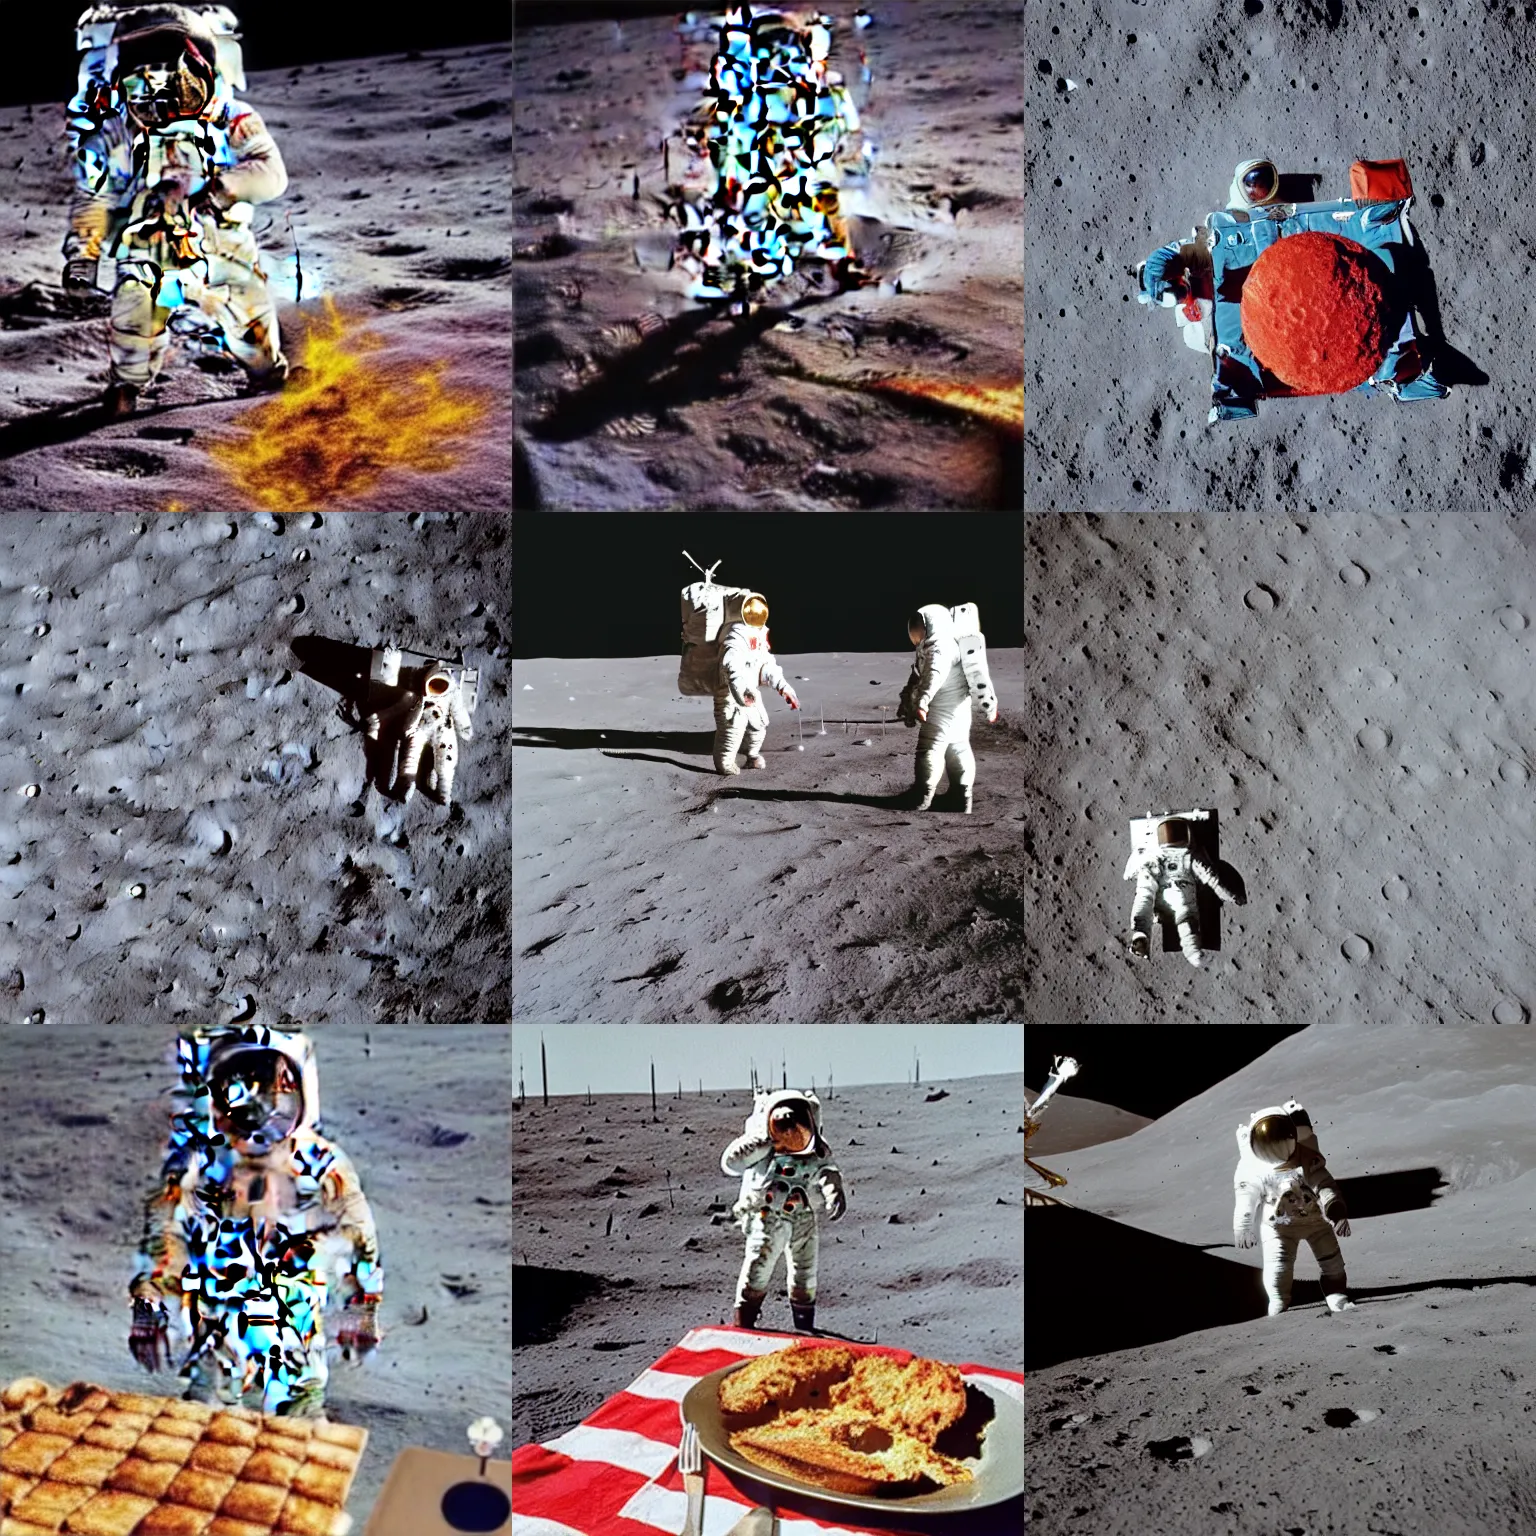 Prompt: A photo of an astronaut on the moon without his helmet, eating garlic bread, with knife and fork. | Red tablecloth | Earth in background | Grey moon craters | 1969 Apollo 11 landing | 120mm wide shot